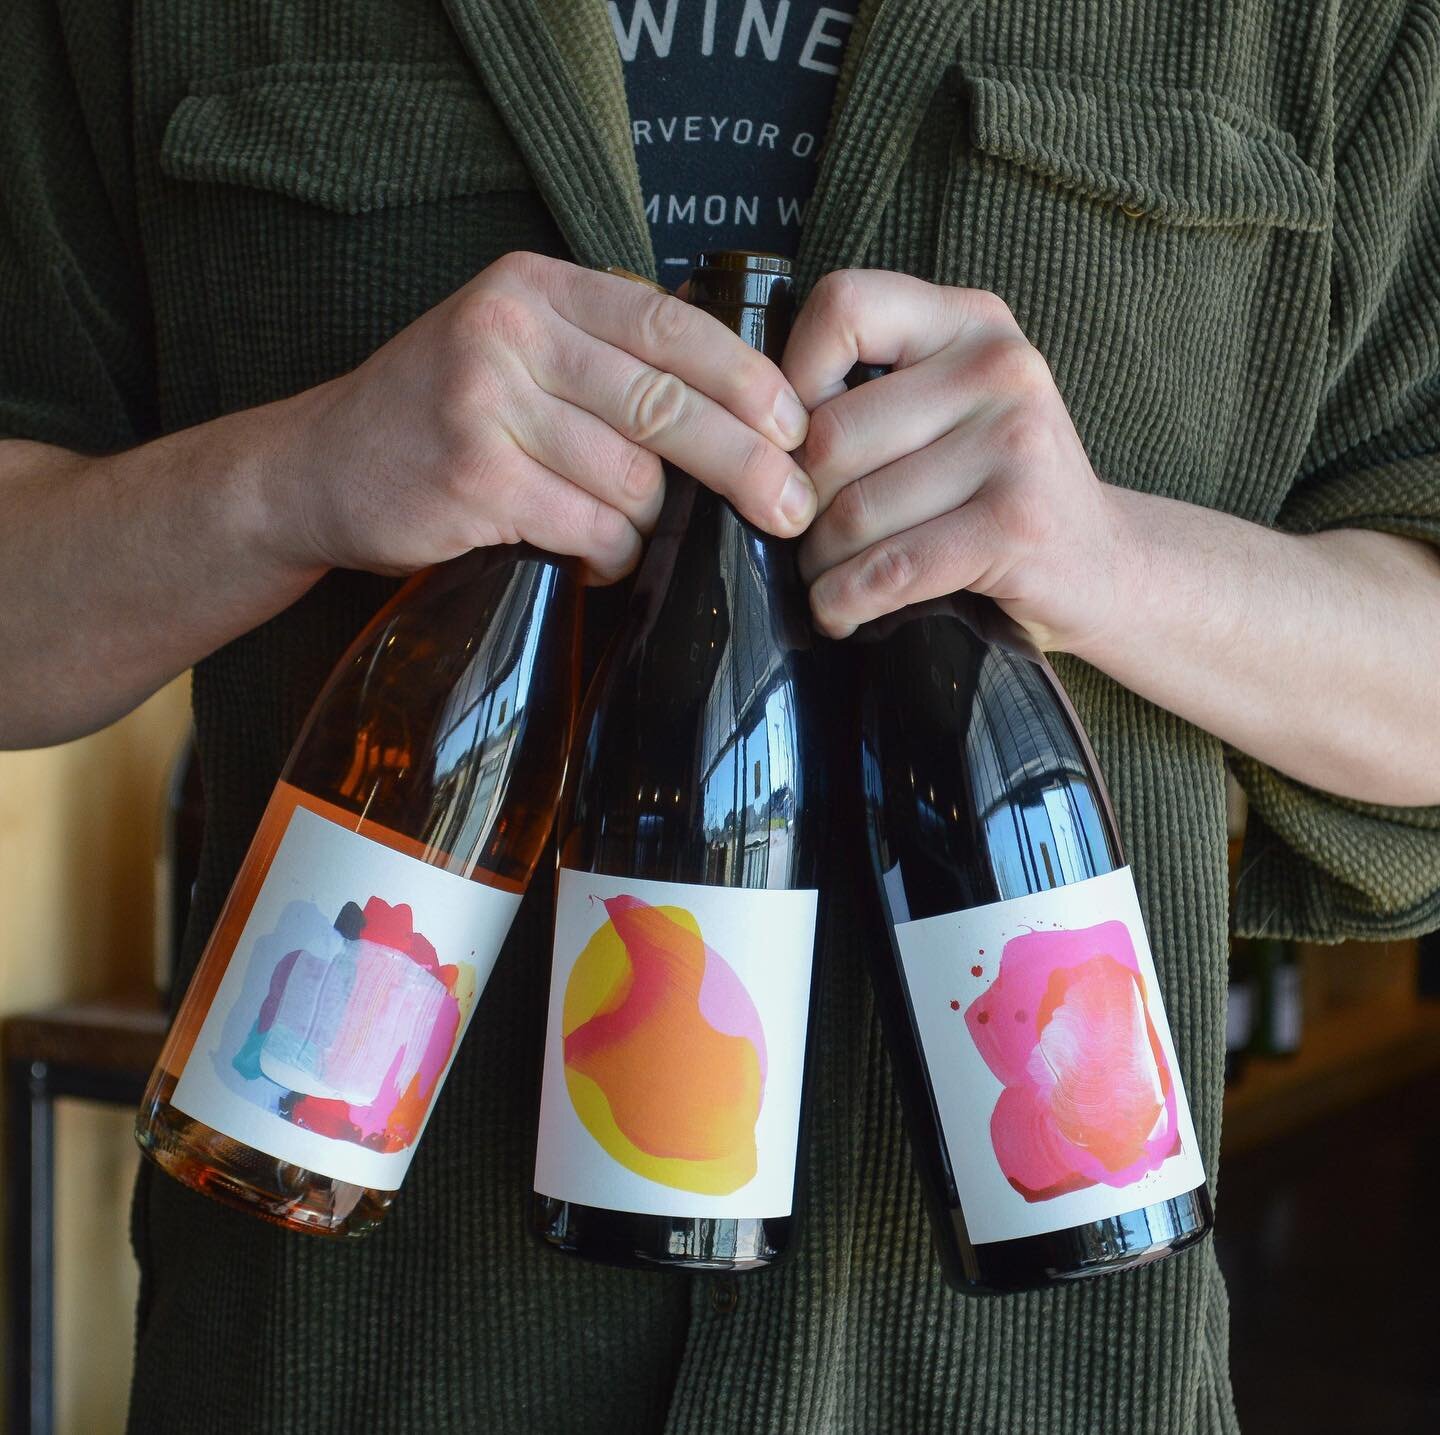 A new wave of @jolielaidewines have landed! Their Pinot Gris hailing from the historic Glen Oaks Ranch in Sonoma is delightfully perfumed and  hums to the tune of stone fruits and bergamot. Their El Dorado Gamay Noir is high-toned with bright strawbe